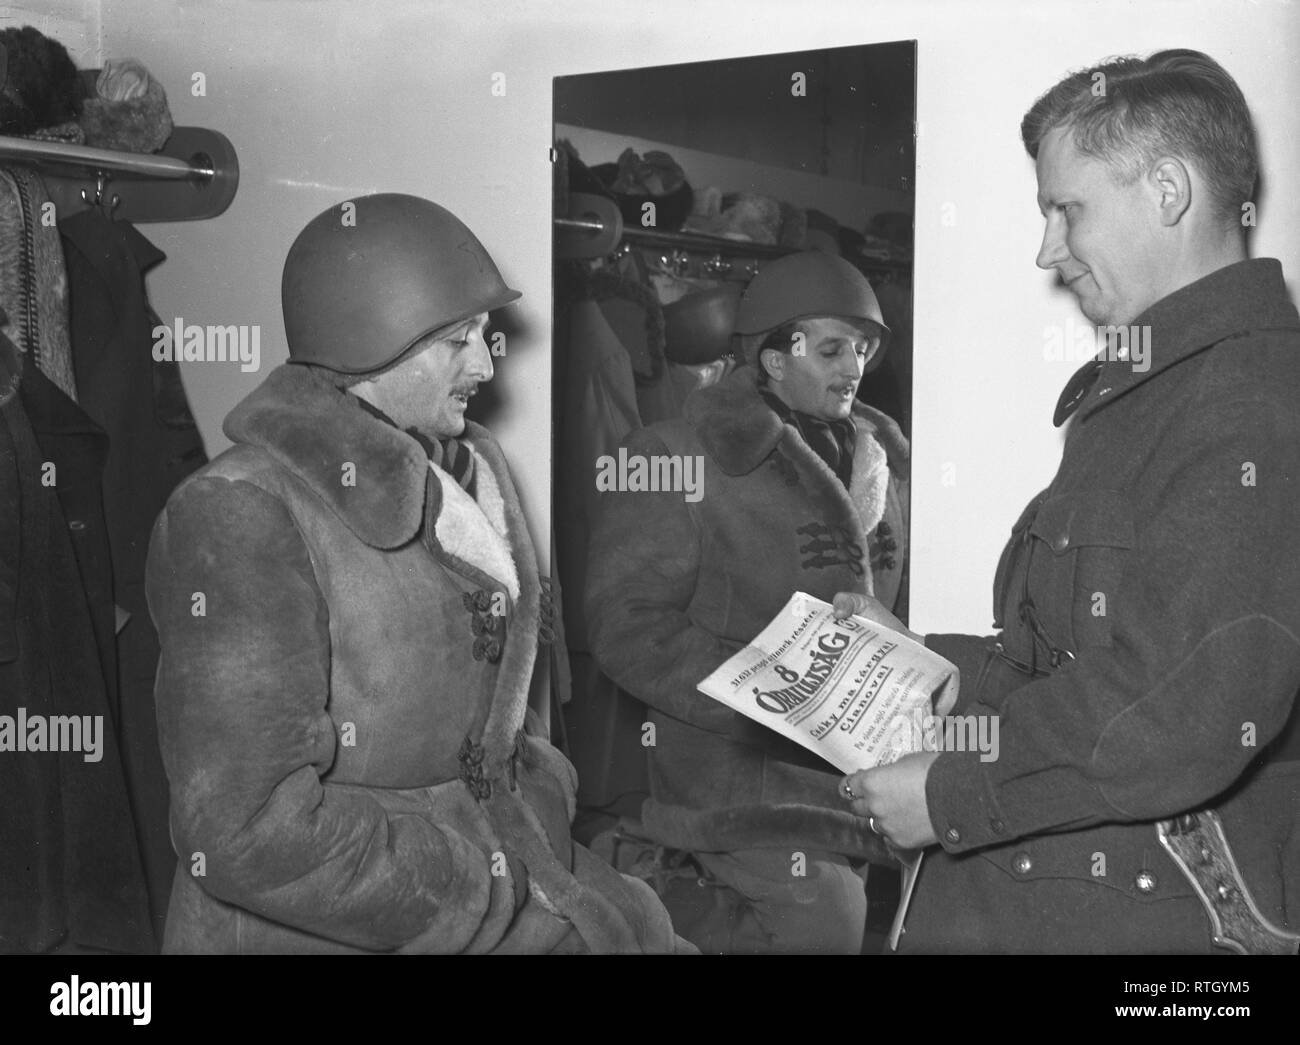 The Winter War. A military conflict between the Soviet union and Finland. It began with a Soviet invasion on november 1939 when Soviet infantery crossed the border on the Karelian Isthmus. About 9500 Swedish volunteer soldiers participated in the war. Rovaniemi, North Finland. Here Eugene Hortobagyi reporting for Hungarian daily paper 8 Orai Ujsag, and a Finnish officer.   January 1940. Photo Kristoffersson ref 49-9. Stock Photo